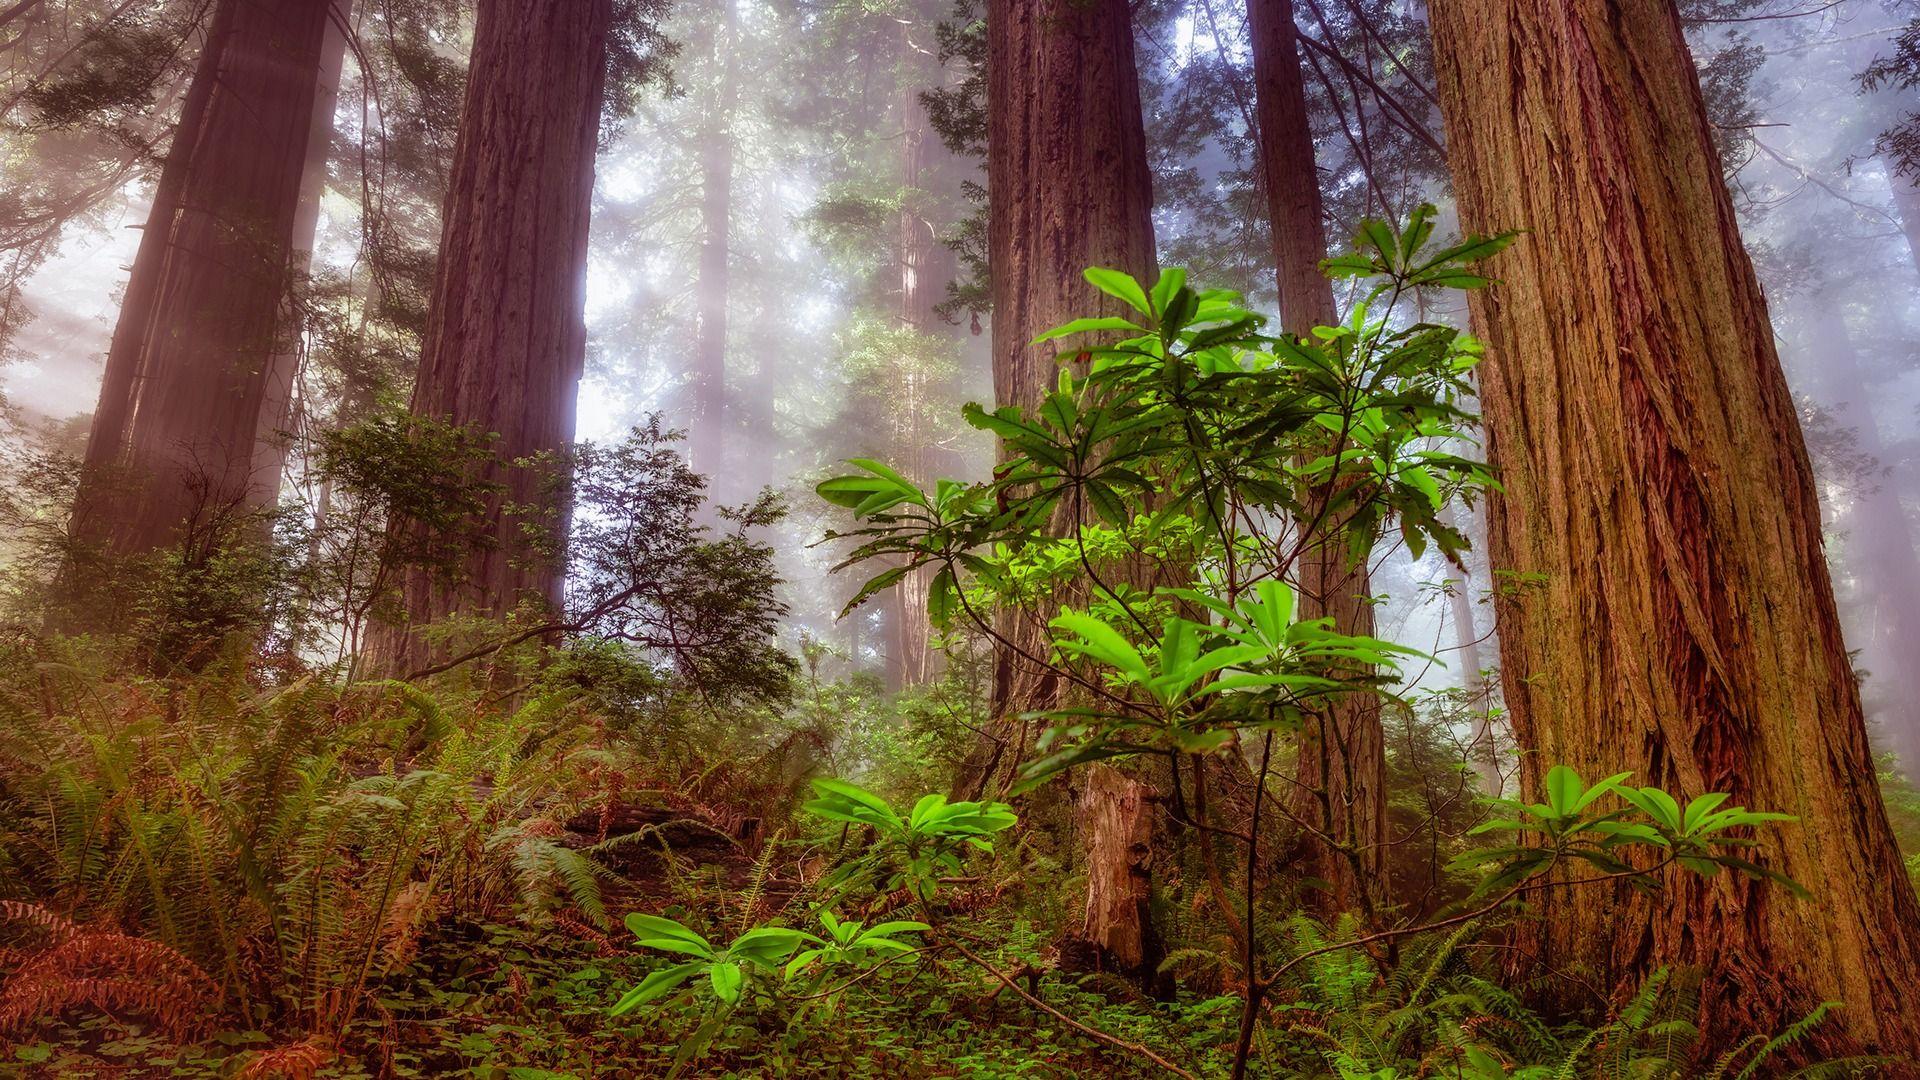 Download wallpaper forest, tree, sequoia, redwood, section nature